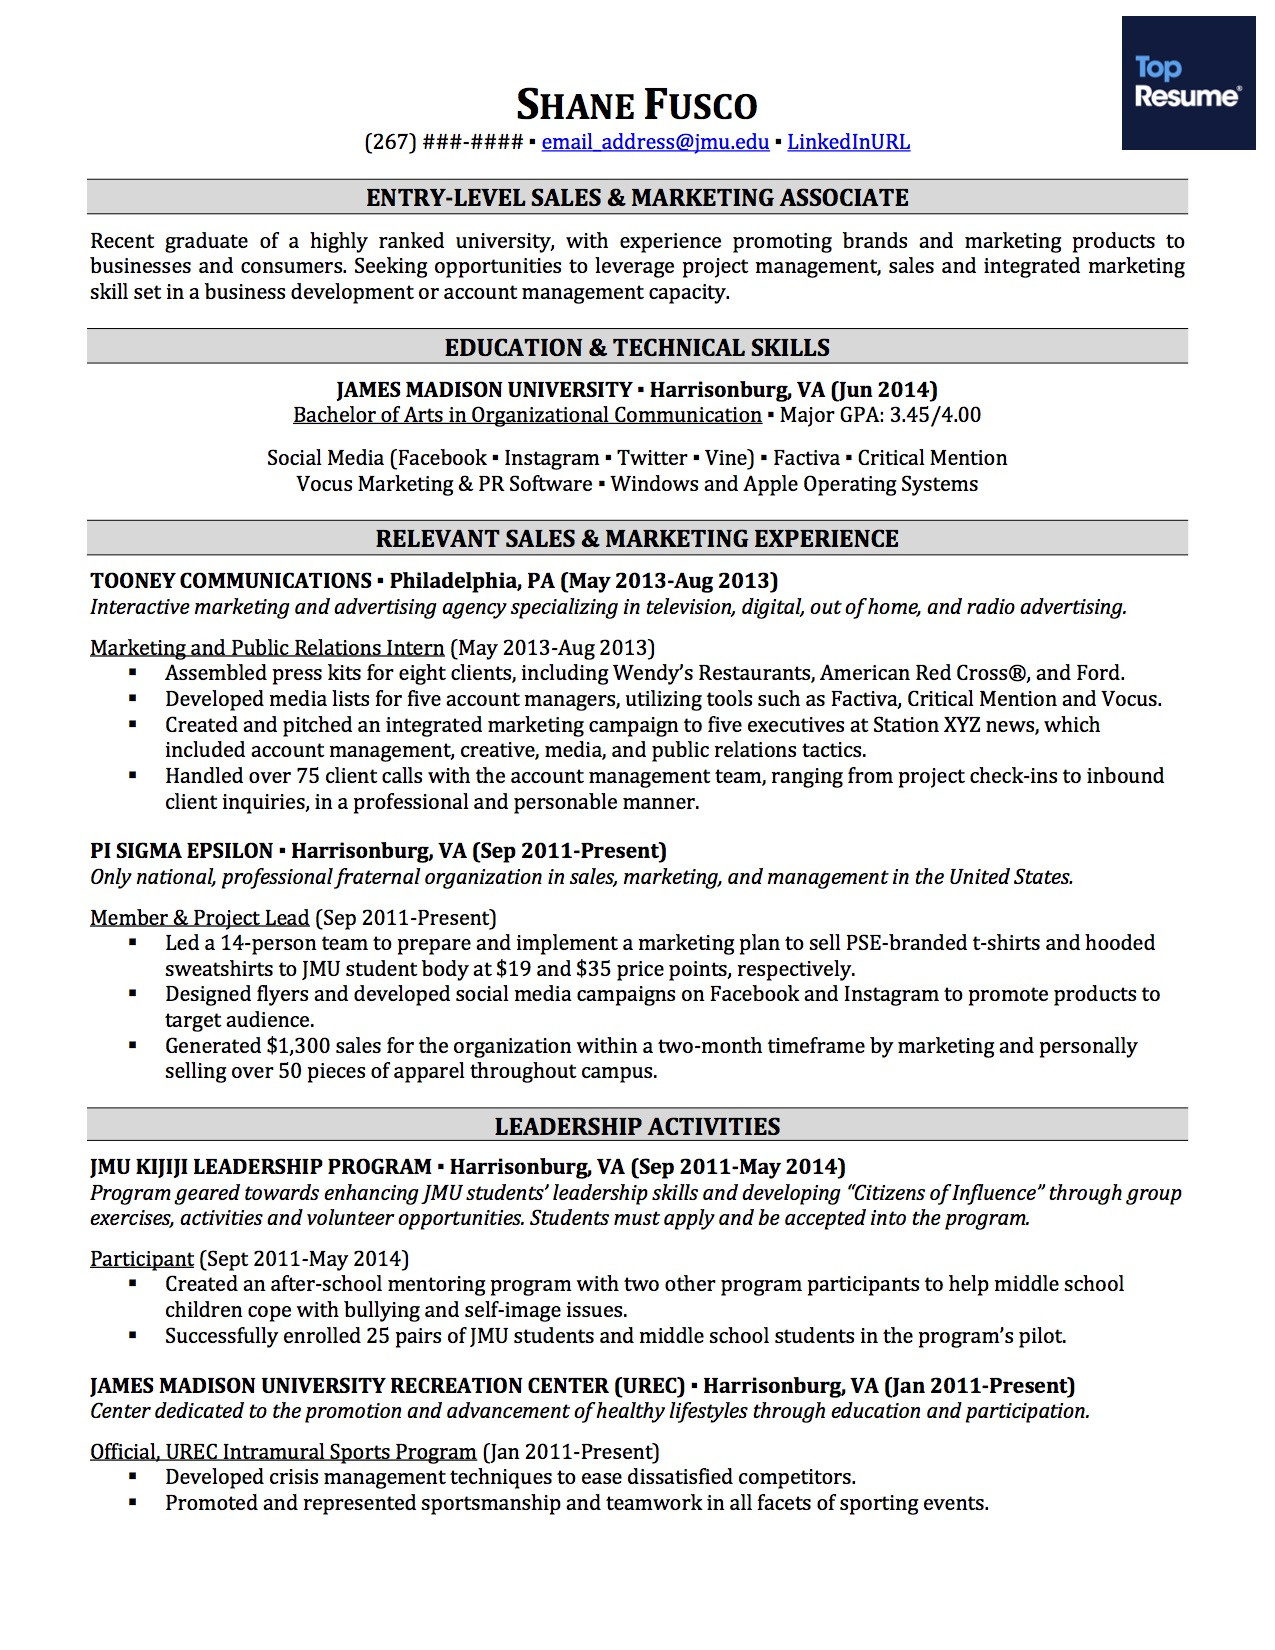 Best Resume Template for No Work Experience How to Make A Resume with No Experience topresume